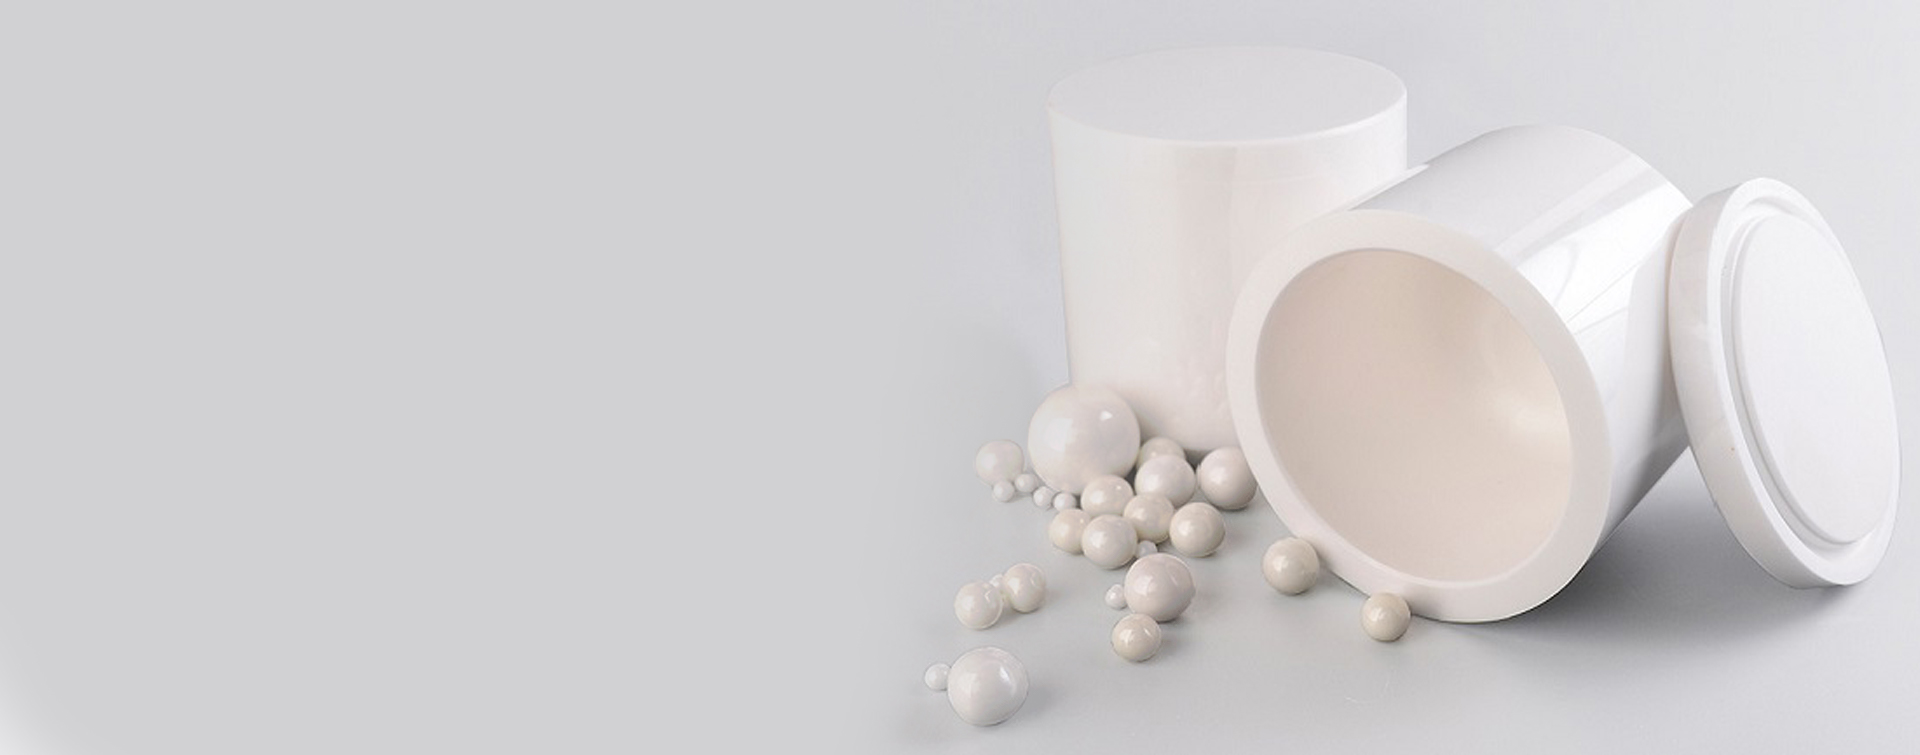 Trusted Supplier of Zirconia Ceramic Products!